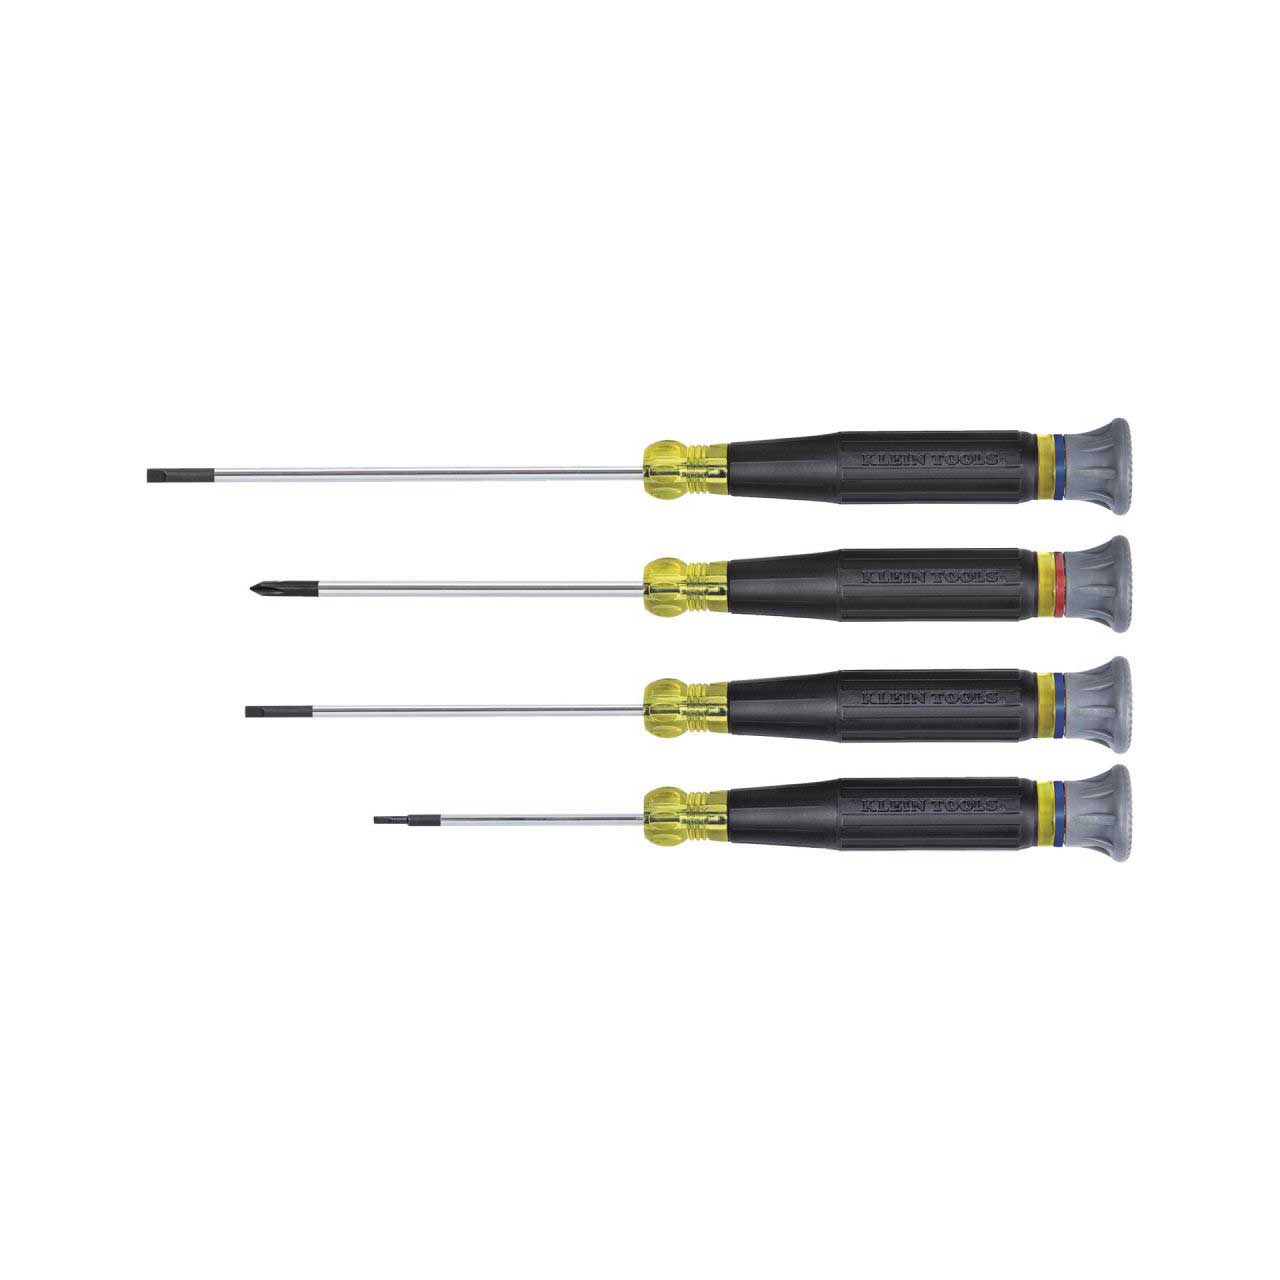 -$0.99 New Quality 6" Screwdrivers slotted & phillips head 